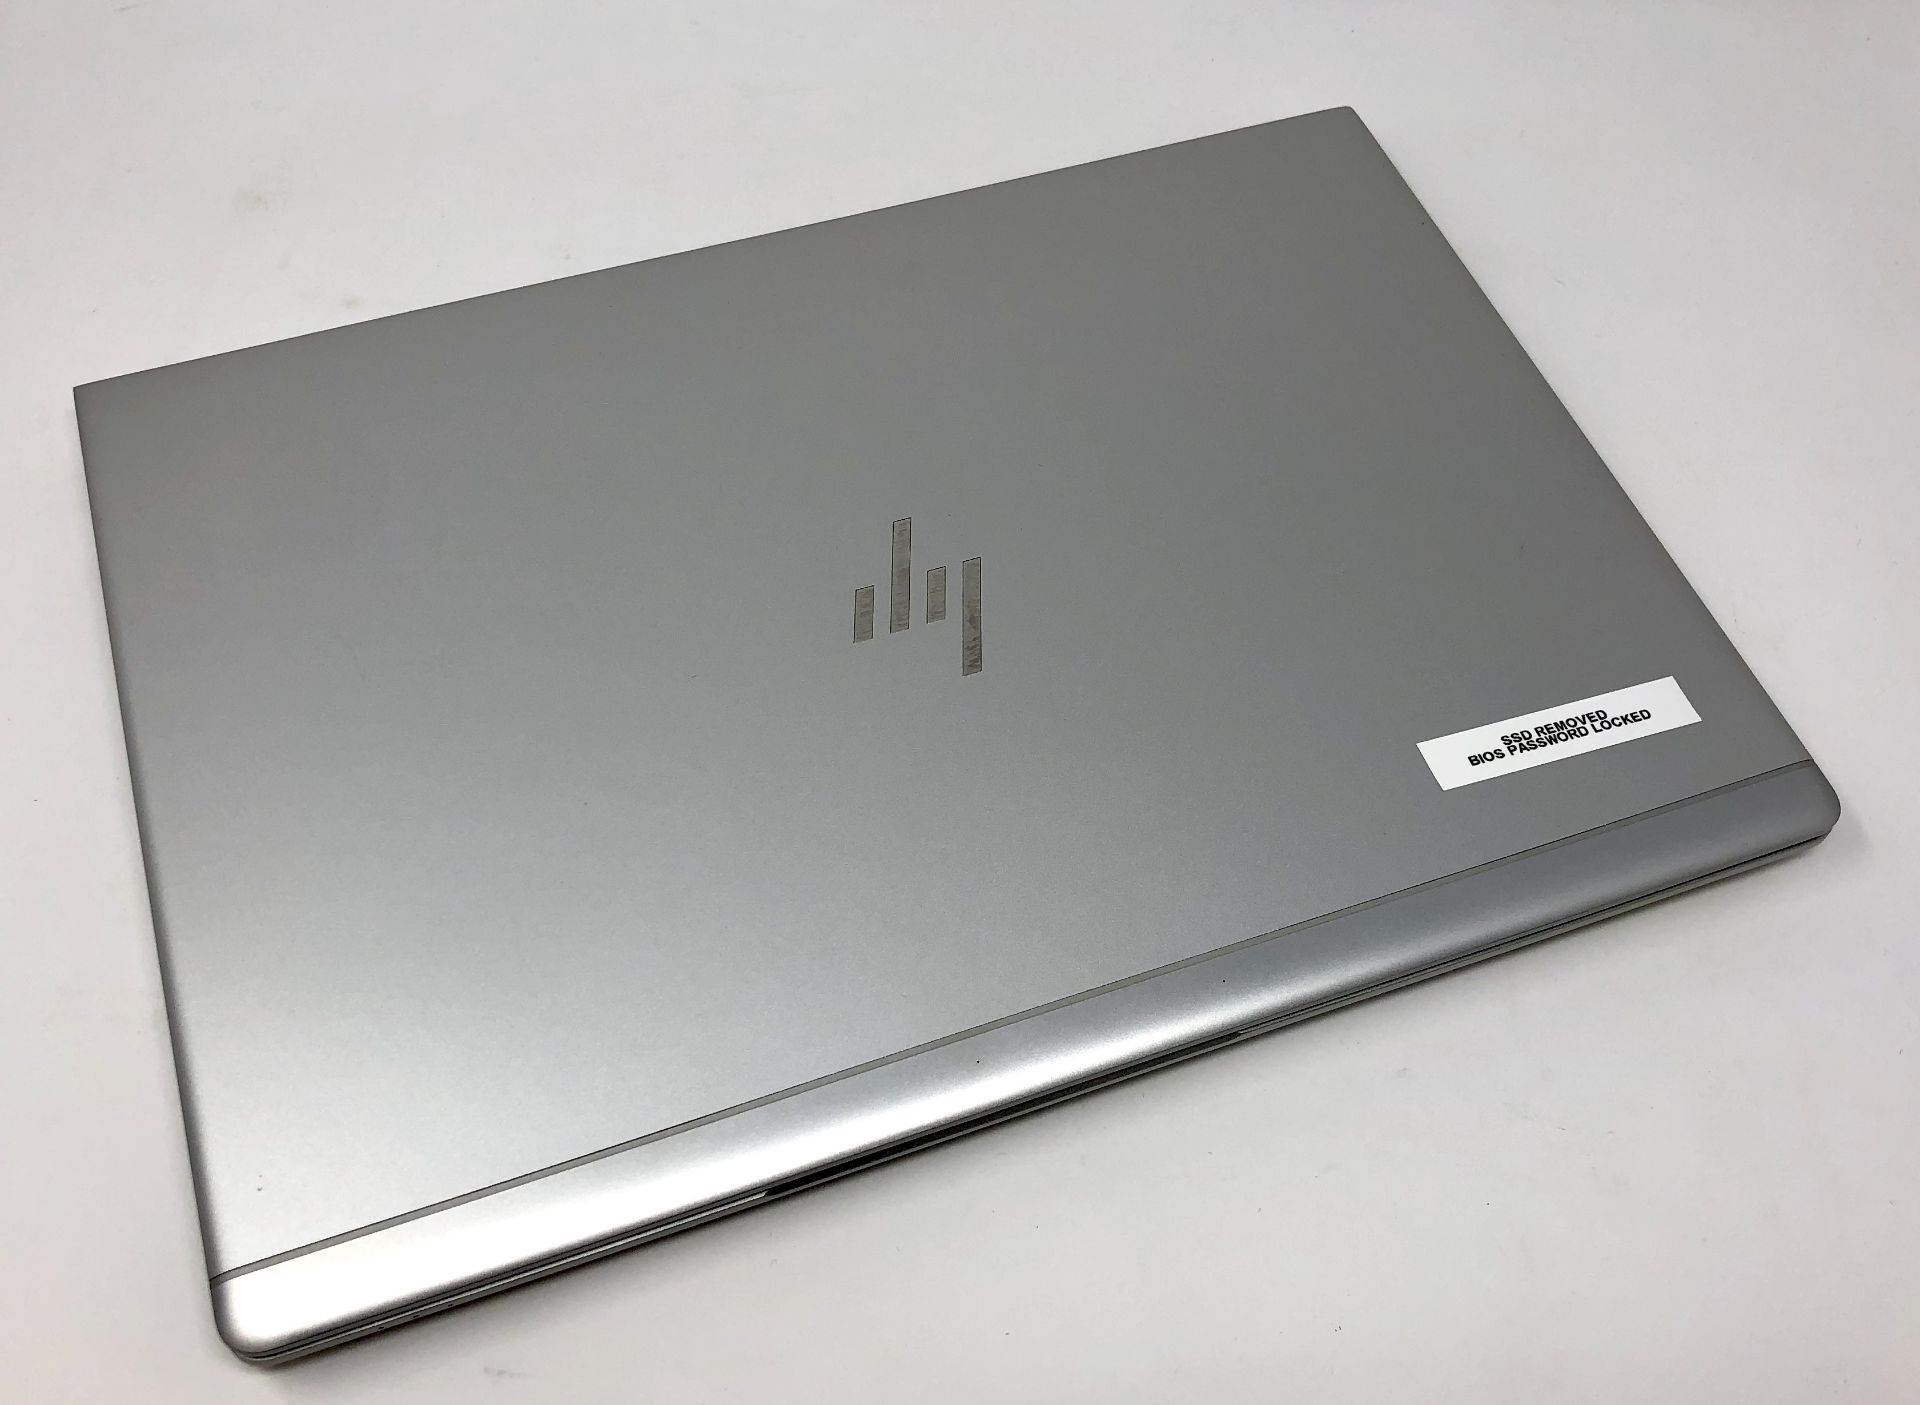 A pre-owned HP EliteBook 840 G6 14" Laptop in Silver sold for parts (Serial: 5CG00238G2) (SSD